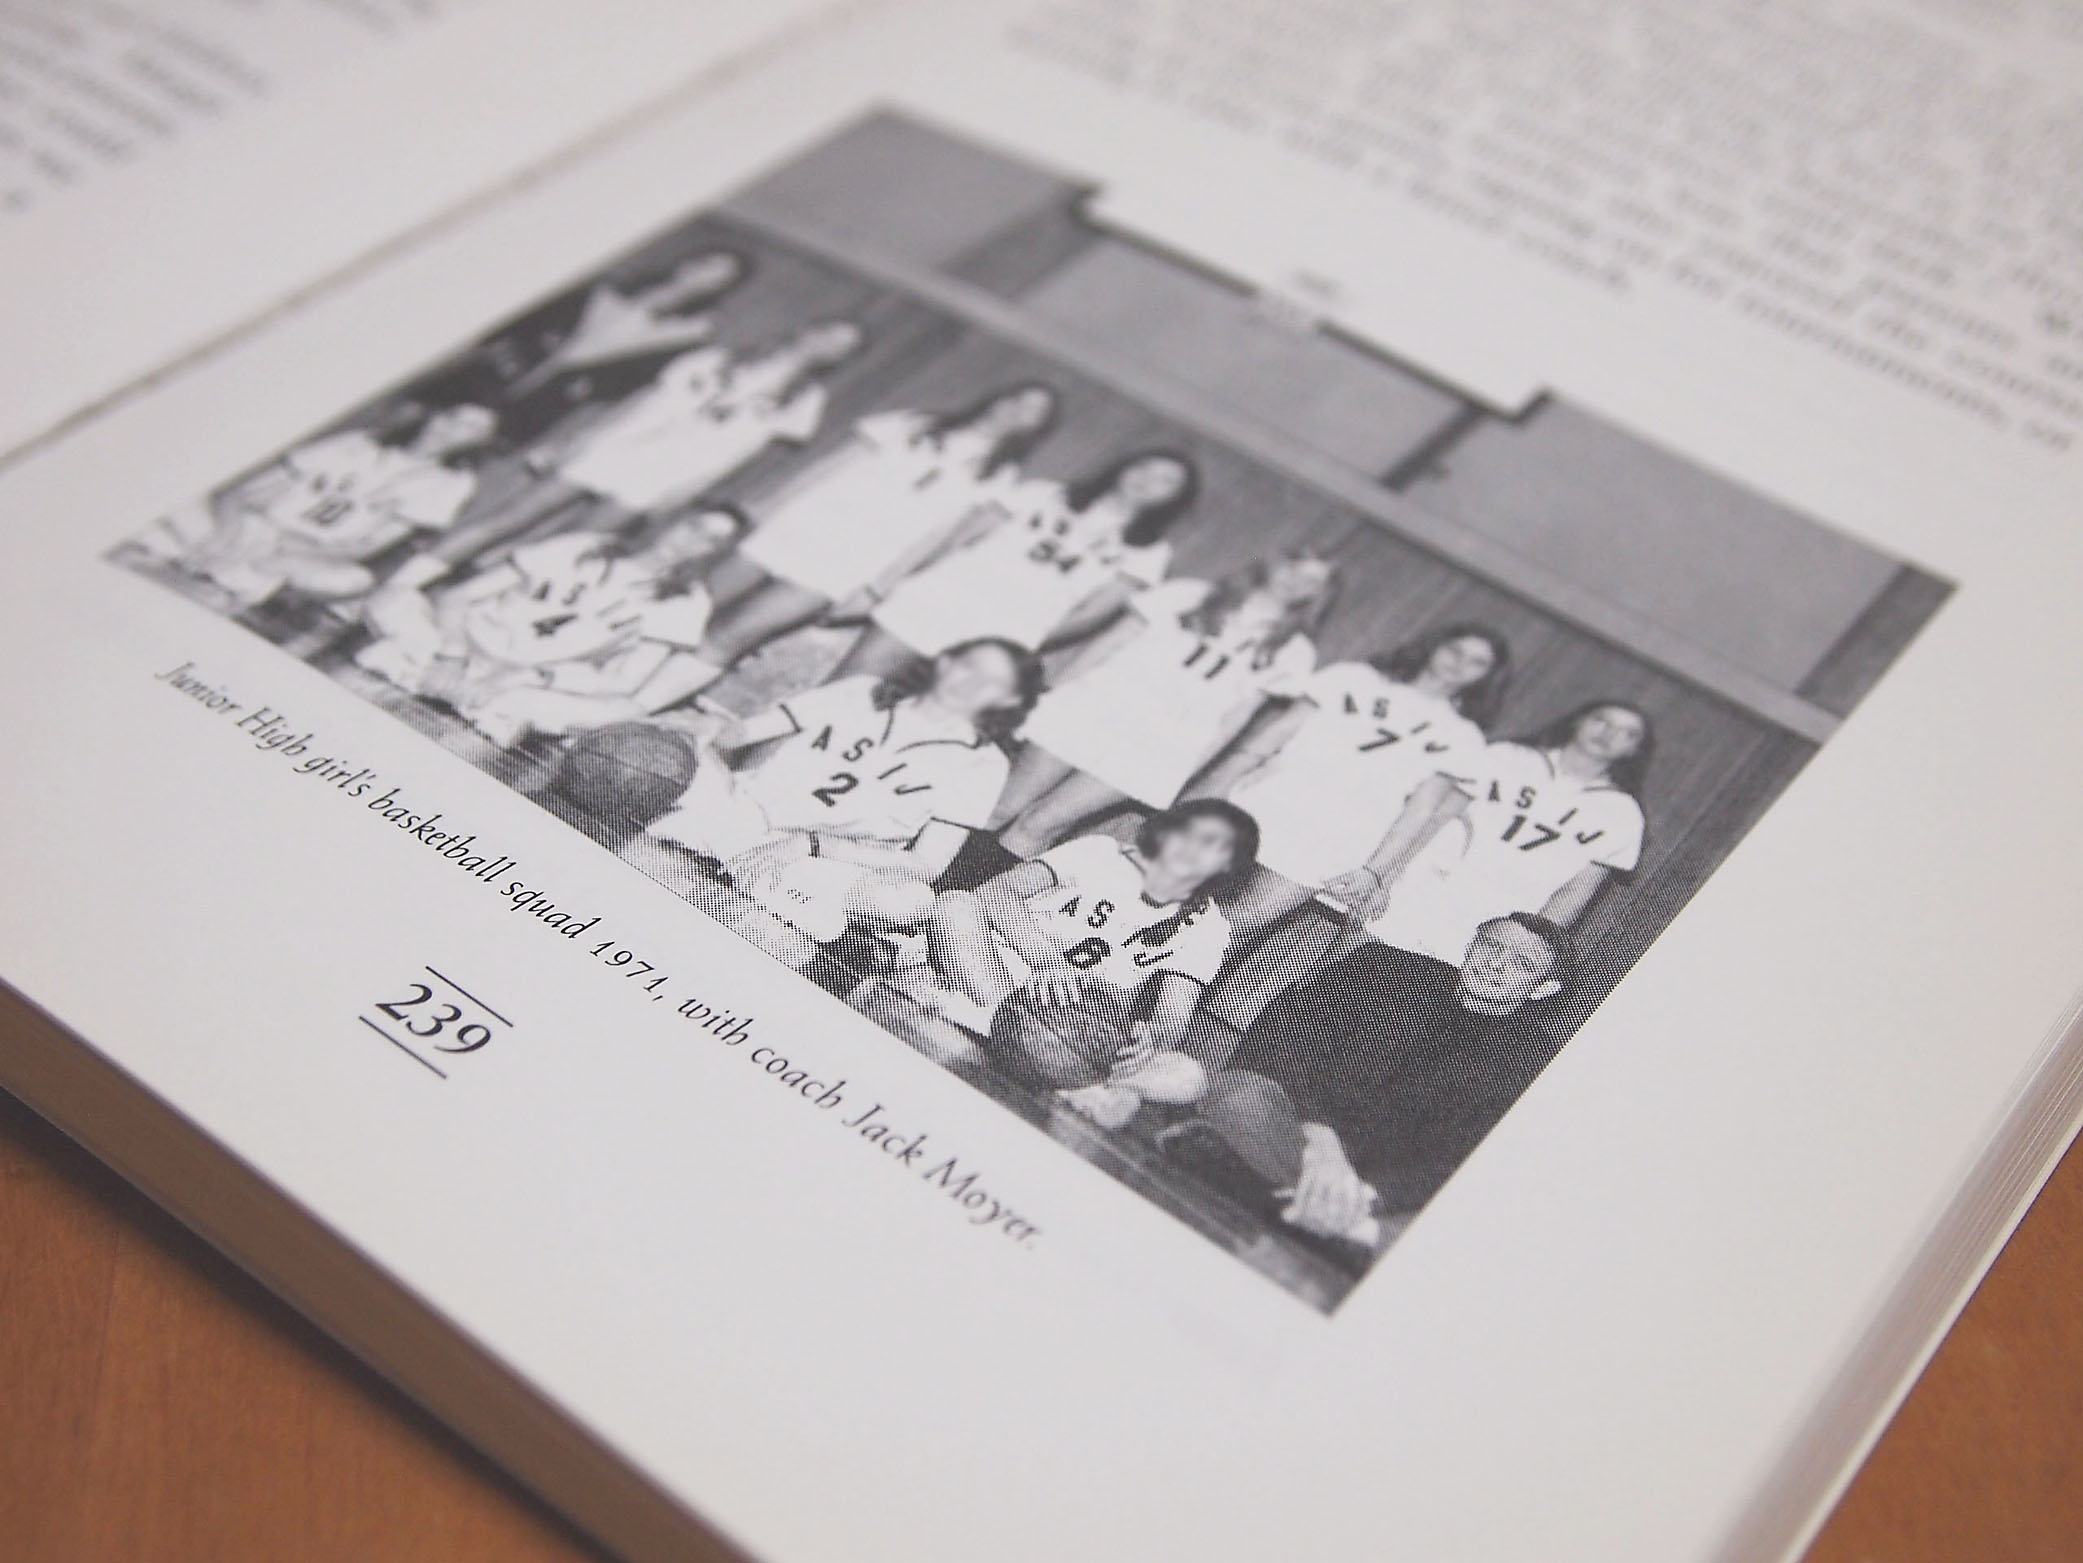 Dark history: One of the remaining copies of “The American School in Japan: A History of Our First Century” shows teacher Jack Moyer with the girls’ basketball team he coached in 1971. Copies of the book were destroyed after Janet Simmons, a former ASIJ student who was abused by Moyer in the early 1970s, confronted staff about the book, which praises Moyer. | JON MITCHELL